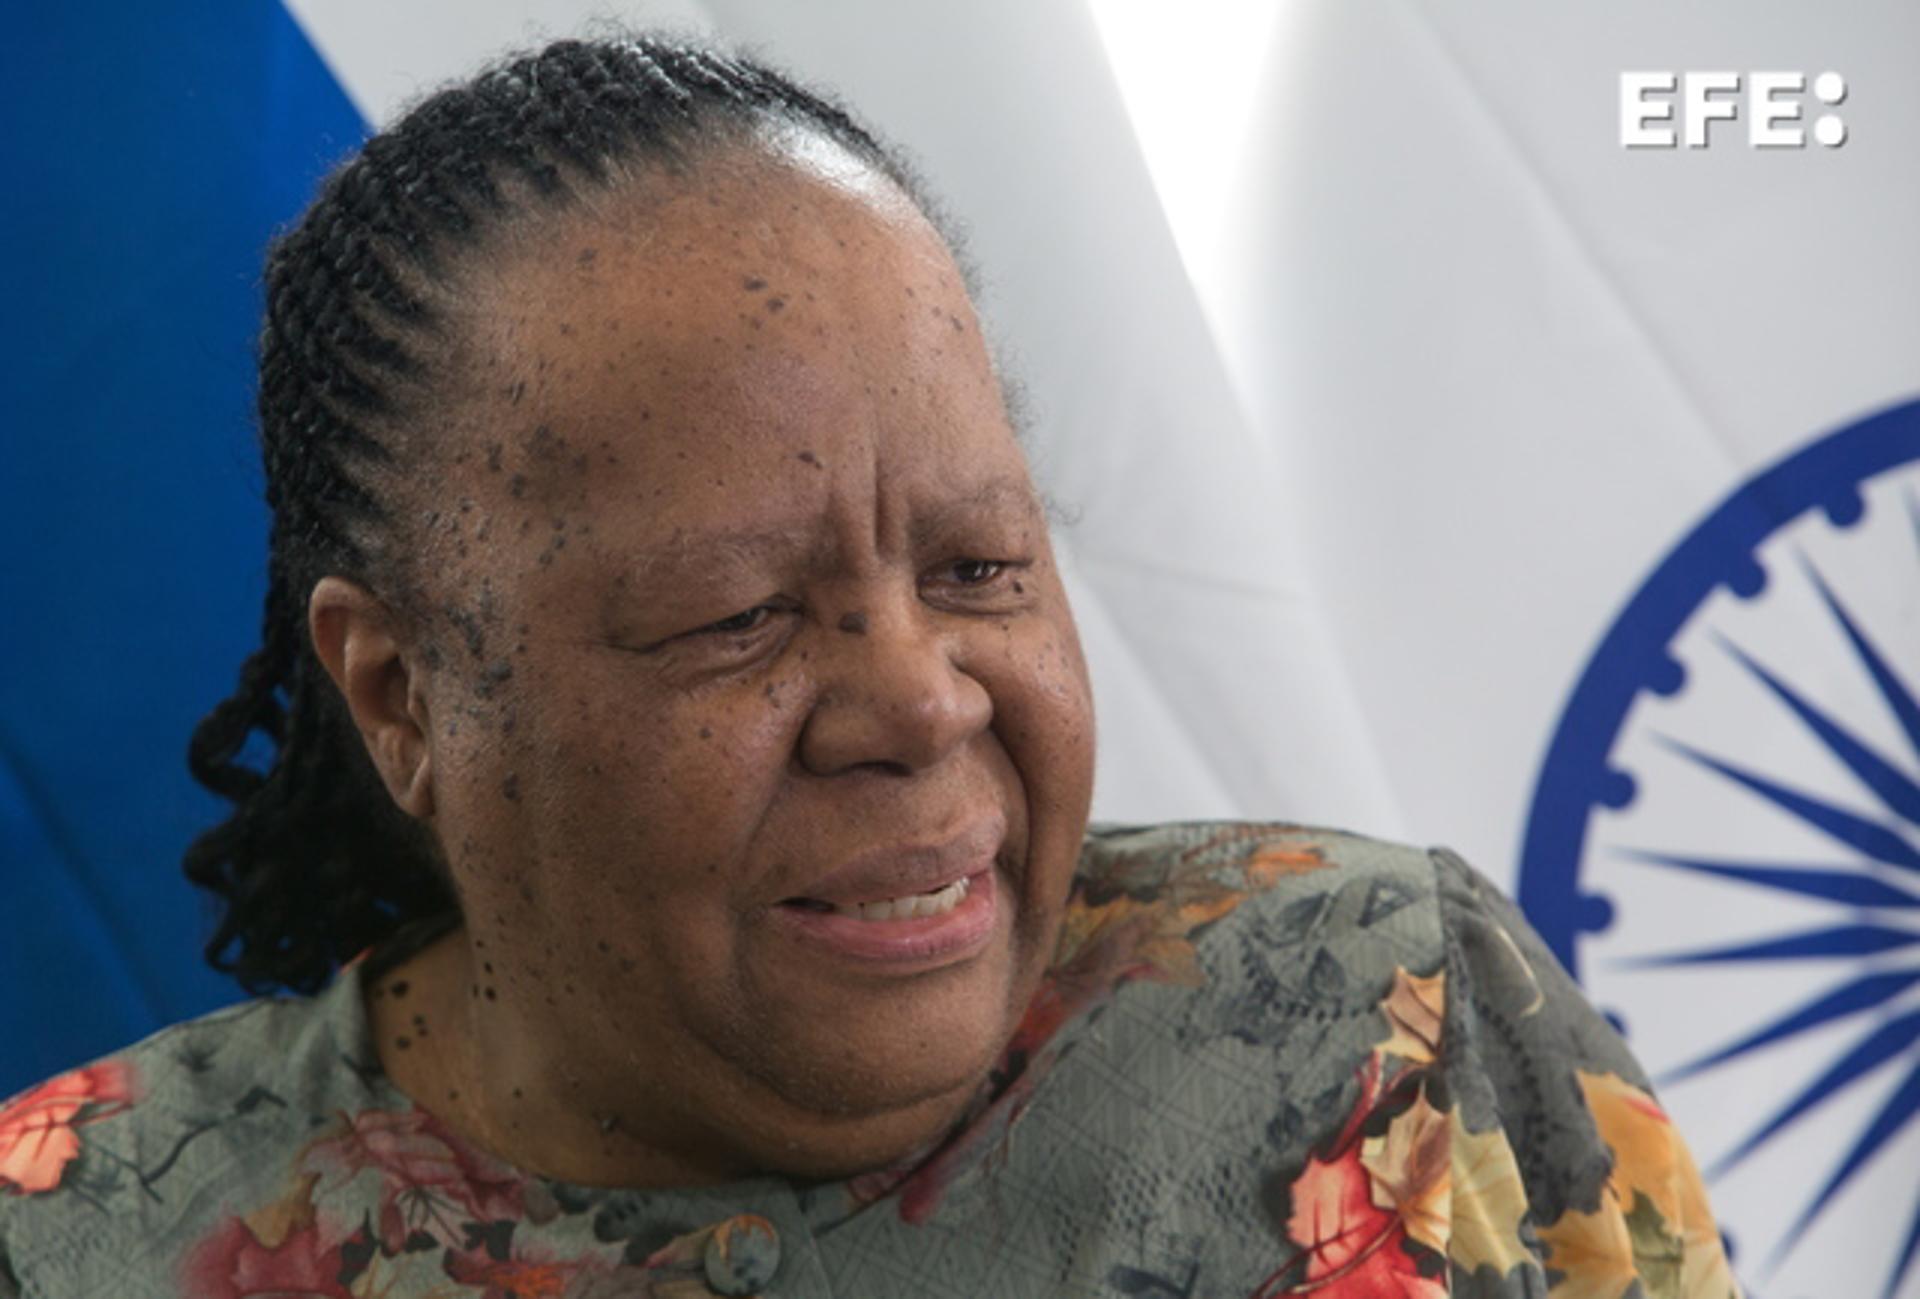 South Africa's minister of International Relations and Cooperation, Naledi Pandor, talks to reporters during the BRICS foreign ministers meeting in Cape Town, South Africa, on 1 June 2023. EFE/EPA/HALDEN KROG
